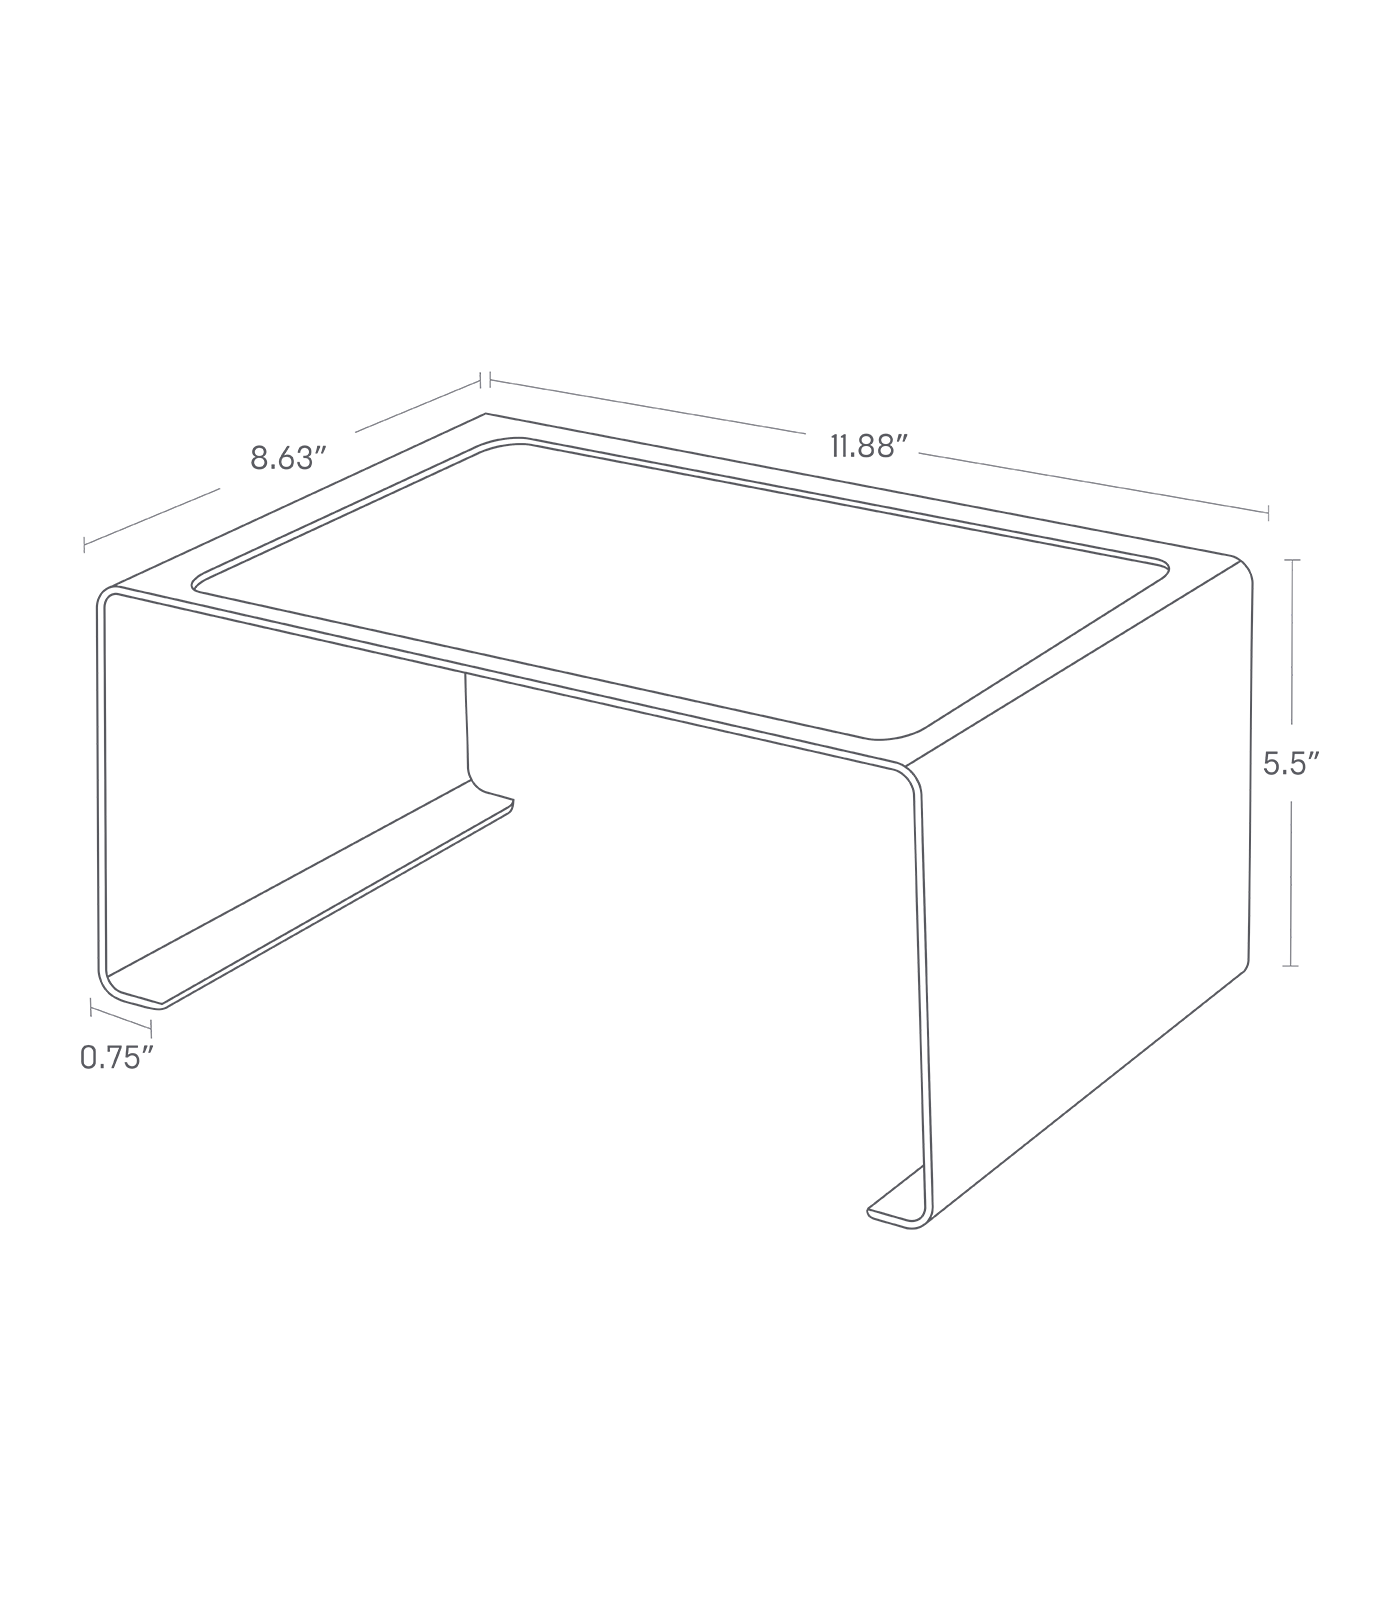 Dimension image for Stackable Countertop Shelf - Large showing a length of 11.88